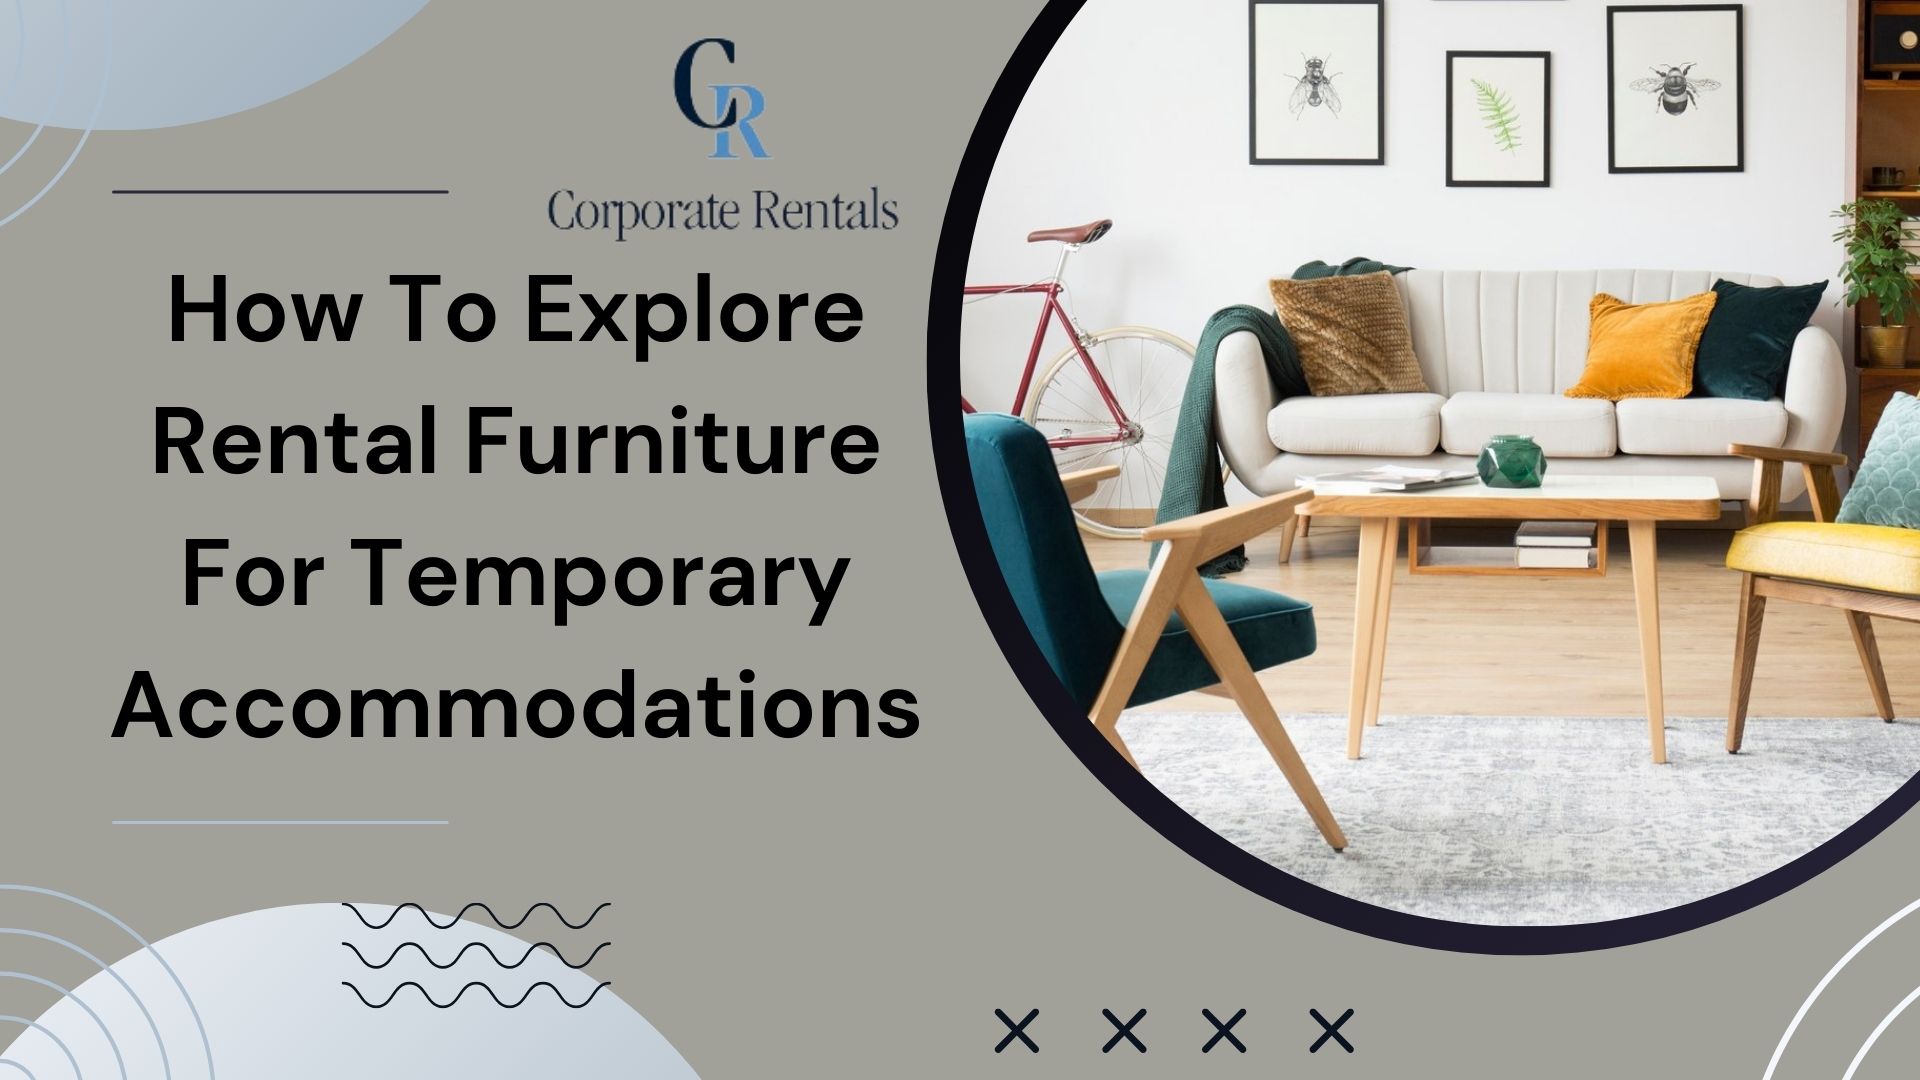 How To Explore Rental Furniture For Temporary Accommodations